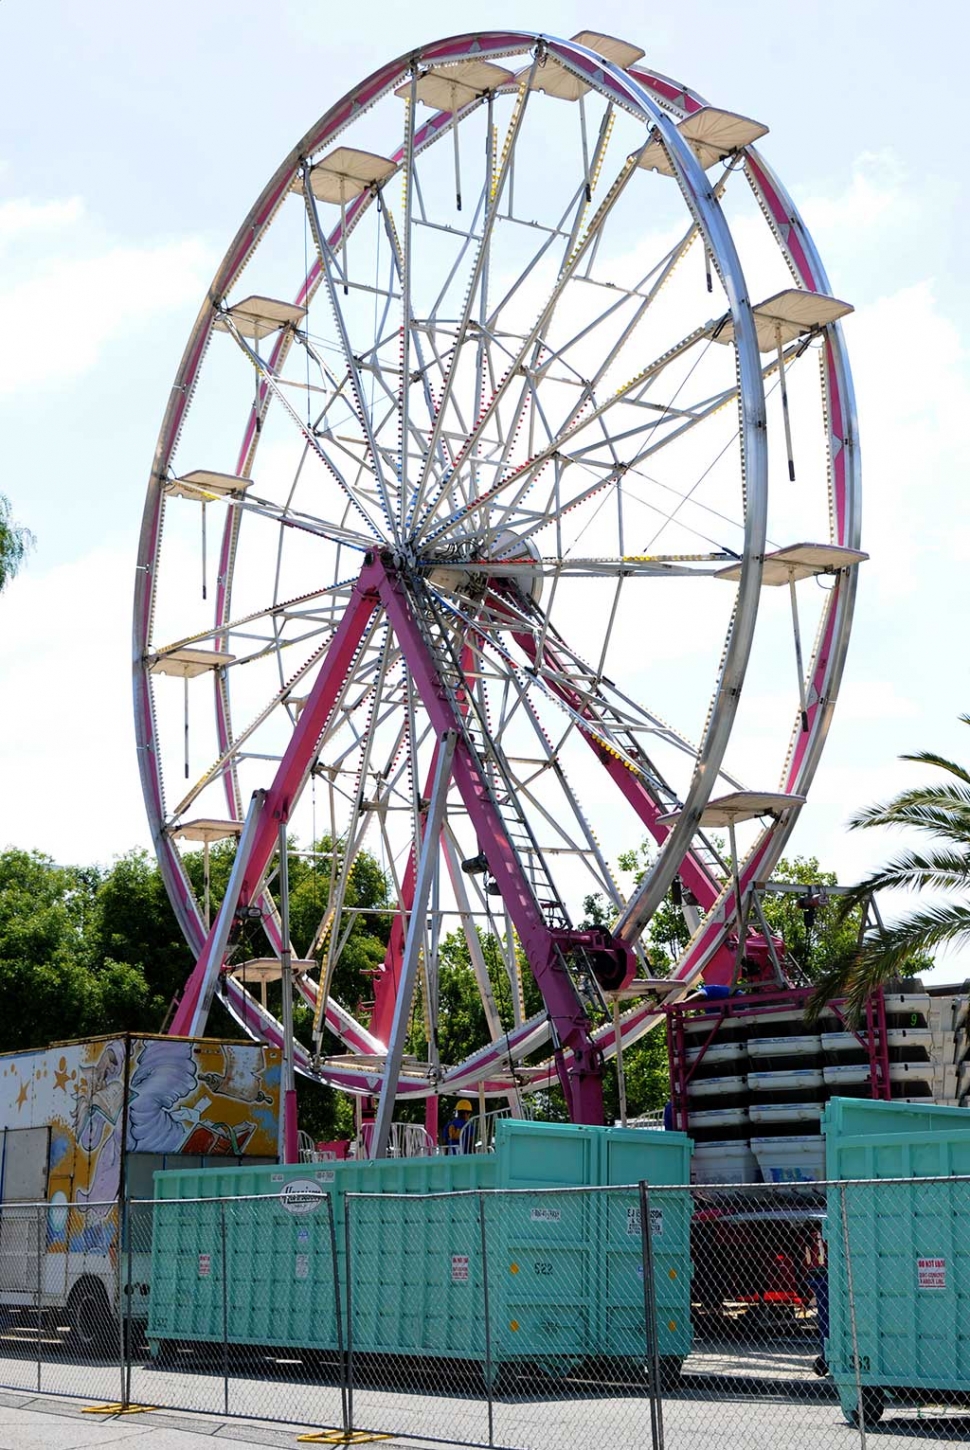 It’s that time of year again! The Fillmore May Festival will be open May 18th through the 21st. Carnival rides, food vendors, music, games, and so much more for the whole family to enjoy. The May Festival Parade will be held Saturday at 10am, 250 Central Avenue. Fair hours: Thursday 5pm-11pm, Friday 5pm-11pm, Saturday 12pm-11pm and Sunday 12pm-8pm. And don’t forget about the Heritage Valley 5K/10K Run, sponsored by the Fillmore Rotary Club. The race will also take place Saturday, May 20th. Check-in for runners is 7am and the race will begin at 8am Sharp.